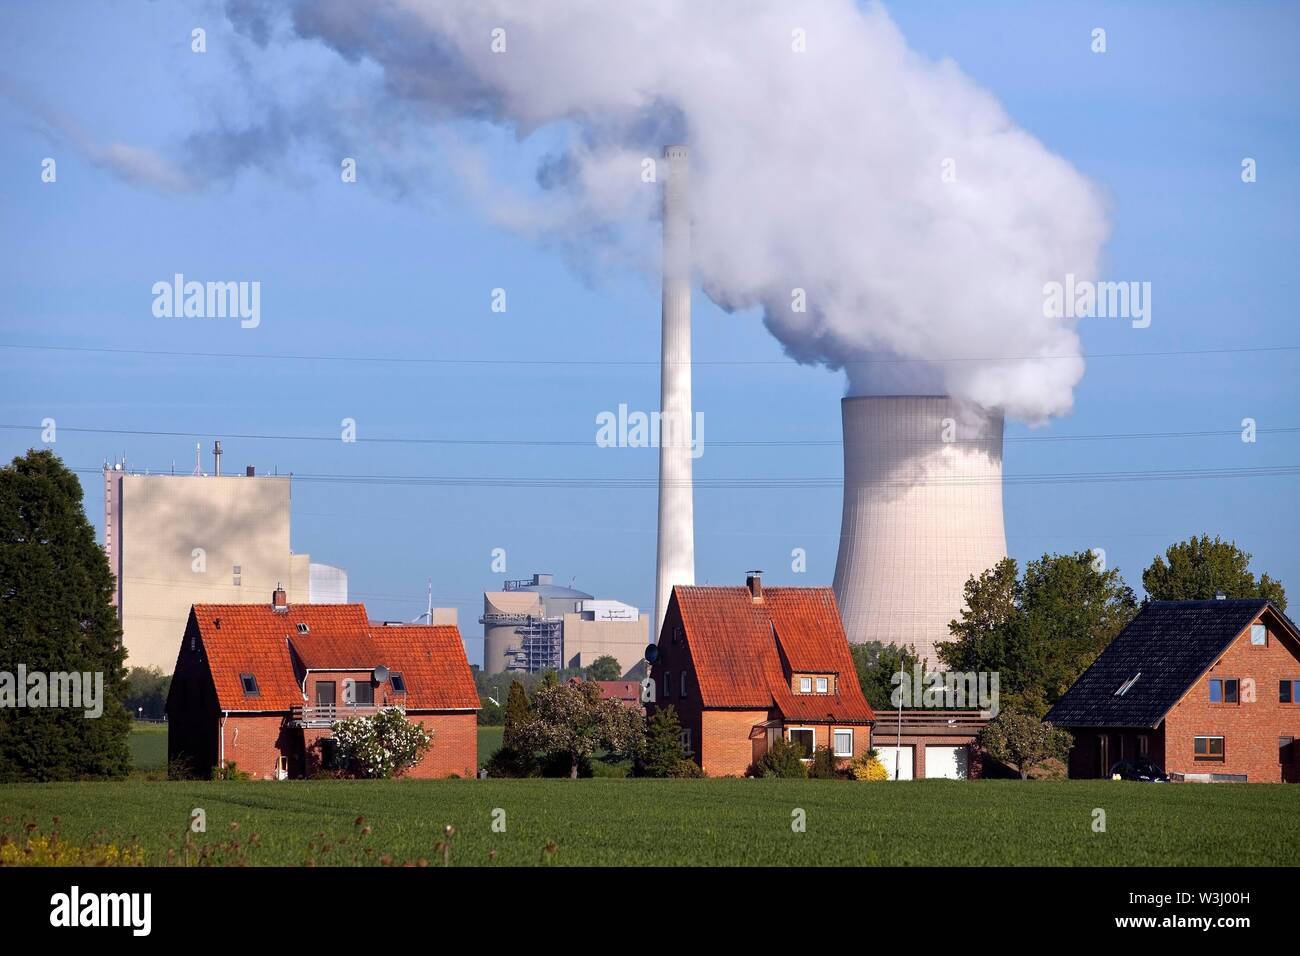 Heyden power plant, coal-fired power plant, global warming, coal phase-out, Petershagen, North Rhine-Westphalia, Germany Stock Photo